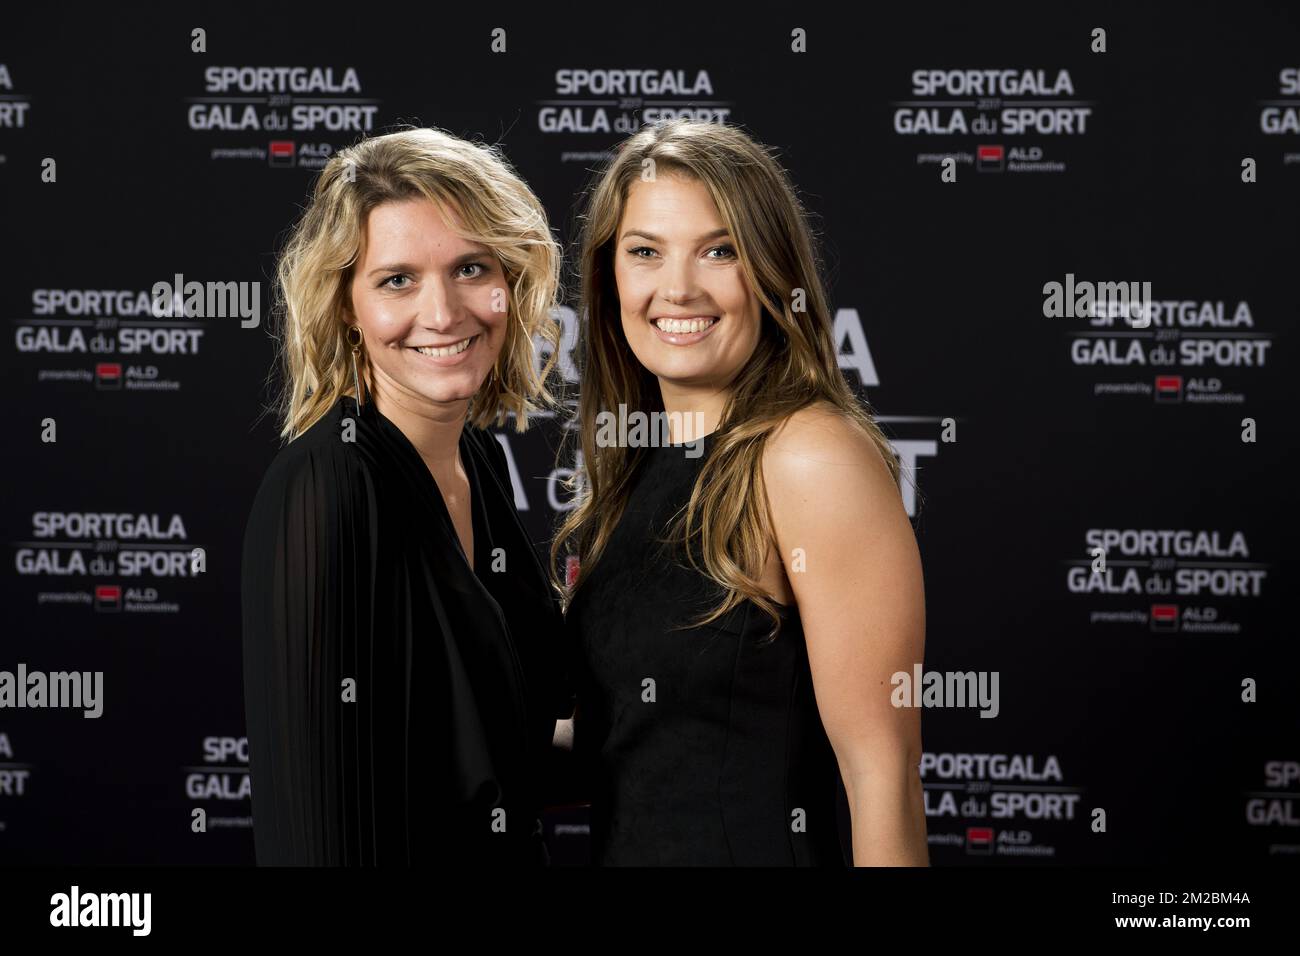 Evi Van Acker (R) pictured during the gala evening for the sport man and woman of the year 2017 awards, Saturday 16 December 2017, in Brussels. BELGA PHOTO JASPER JACOBS Stock Photo